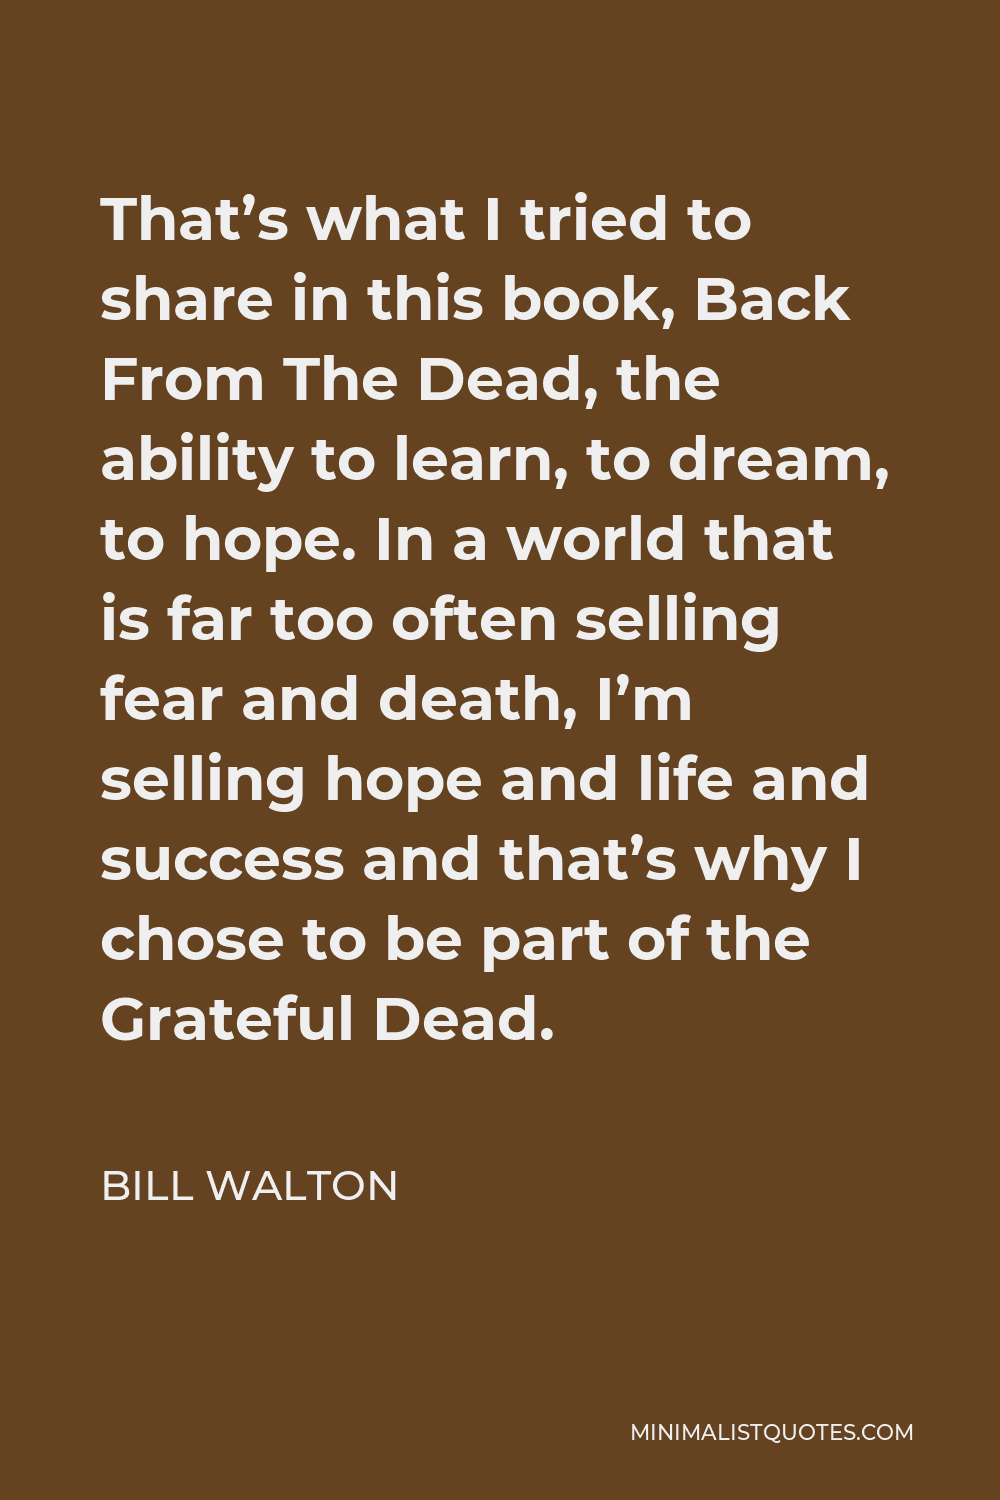 Bill Walton Quote - That’s what I tried to share in this book, Back From The Dead, the ability to learn, to dream, to hope. In a world that is far too often selling fear and death, I’m selling hope and life and success and that’s why I chose to be part of the Grateful Dead.